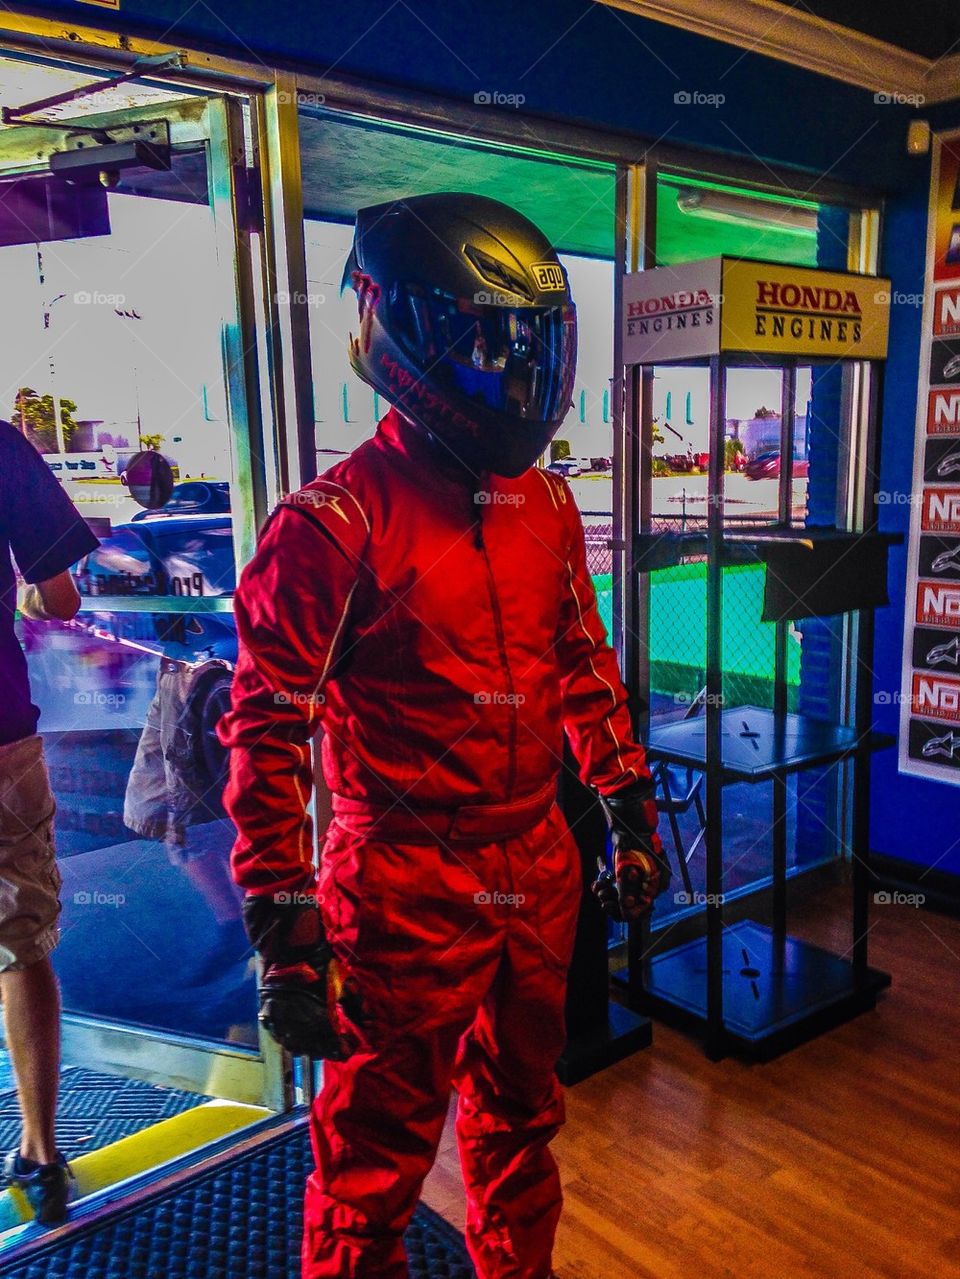 The red stig